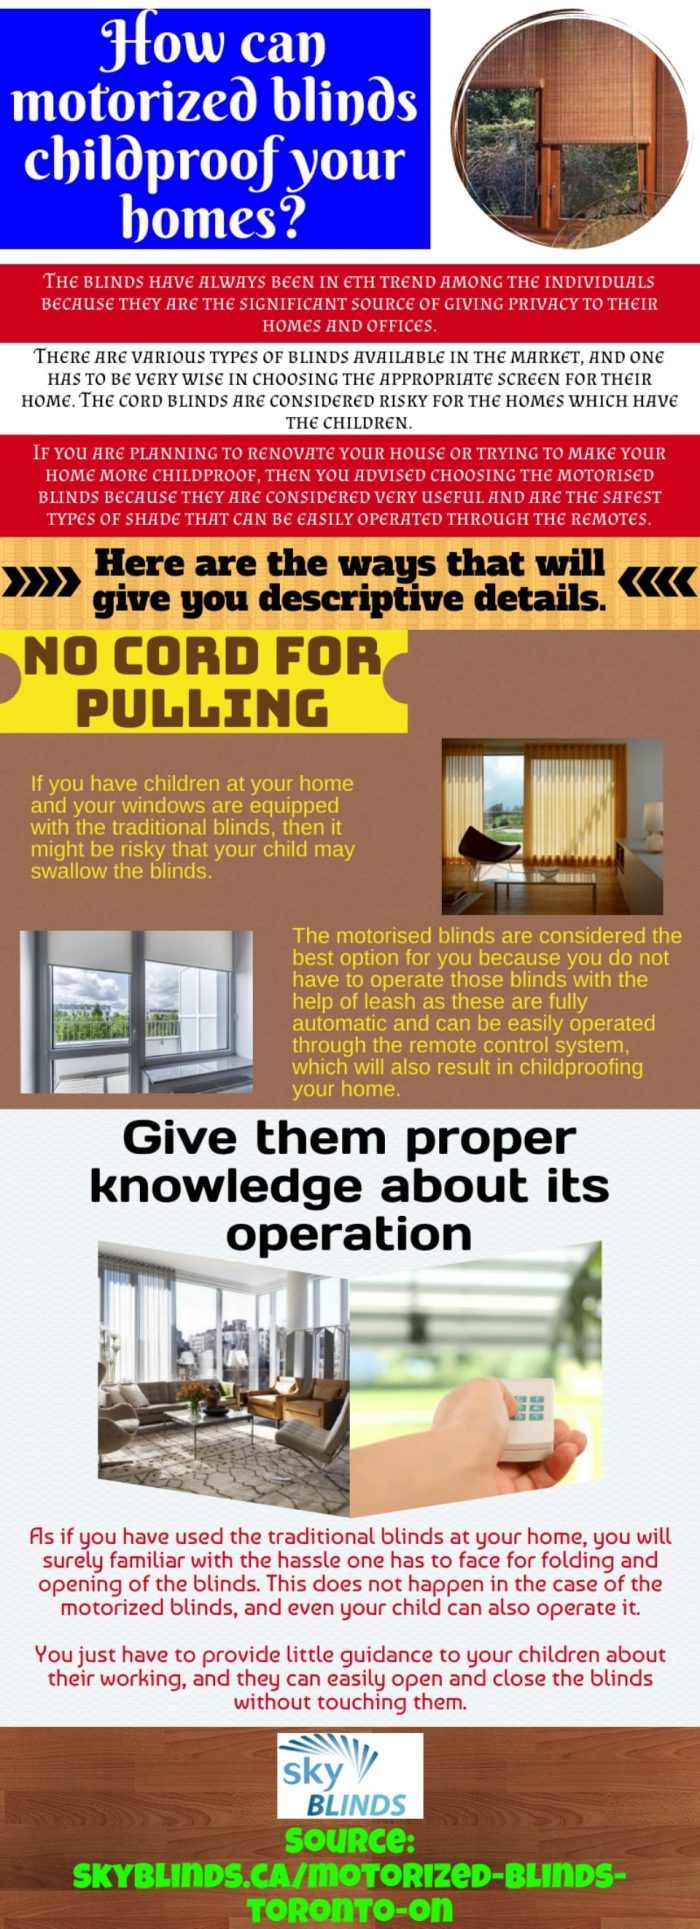 Motorized blinds And live a comfortable life